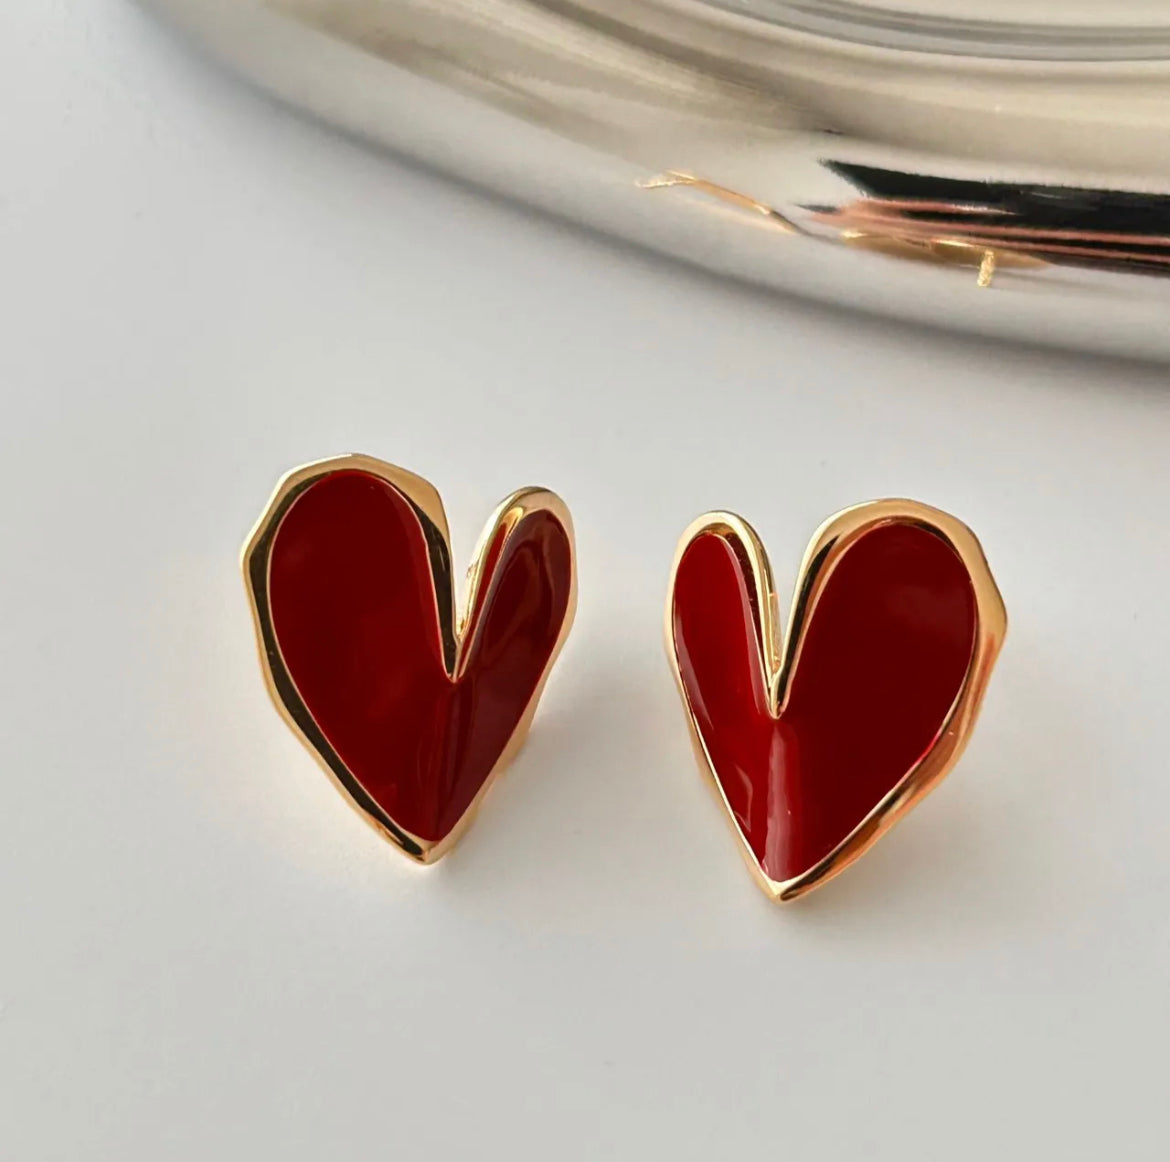 Large Red Heart Earrings | Red jewelry | Red earrings | Gold jewelry | Silver jewelry | Women's earrings